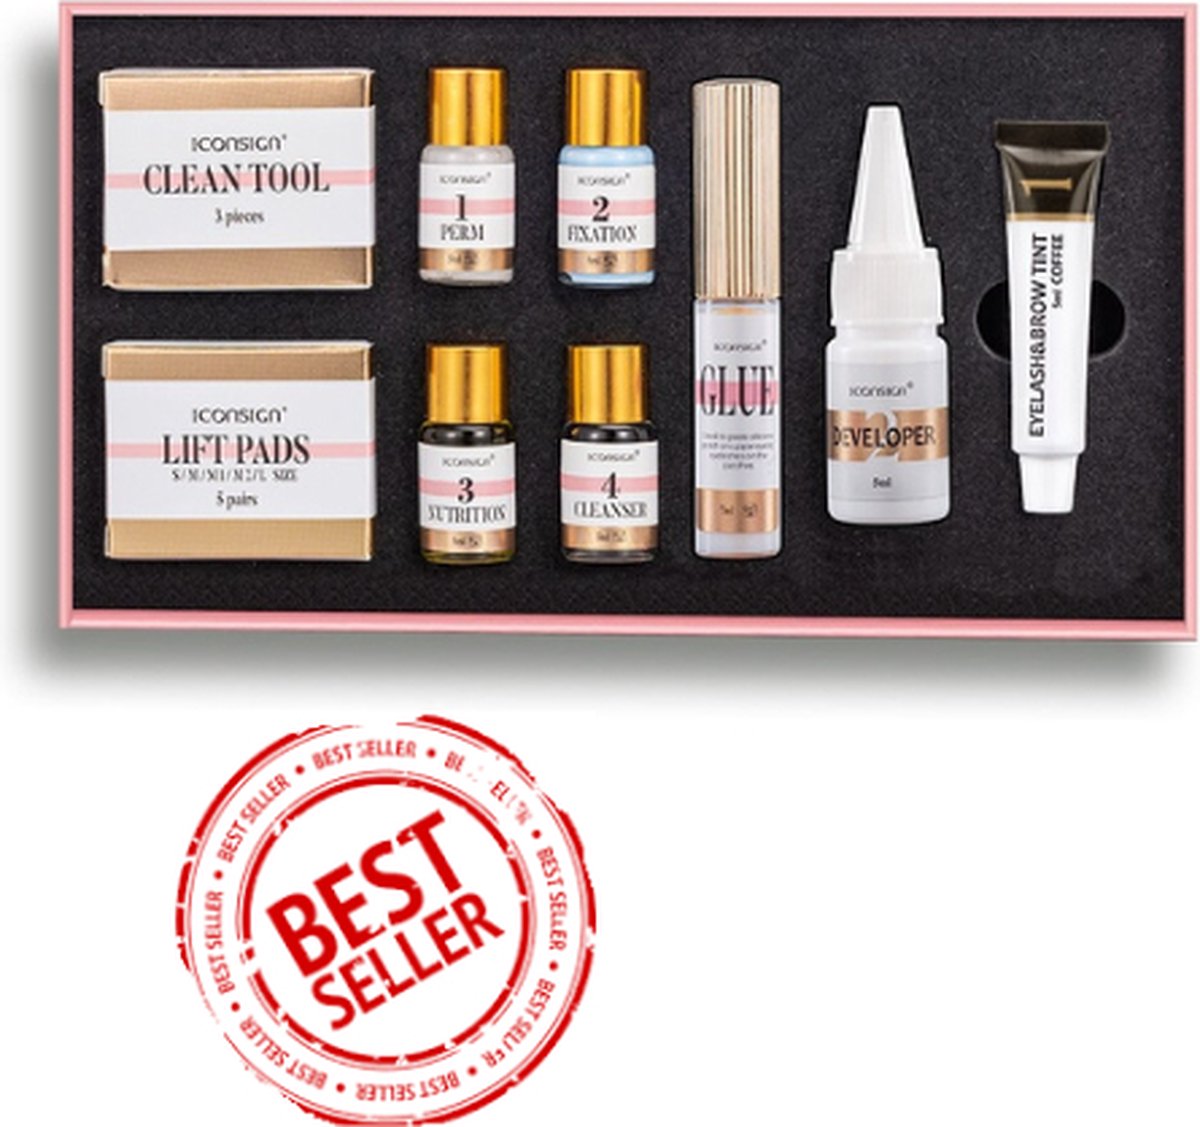 Lash Lift Kit - Wimper lift - Inclusief Coffee Wimperverf - Wimperlifting set - Wimpers Krullen- Eyelash lift - Wimperserum - Coffee